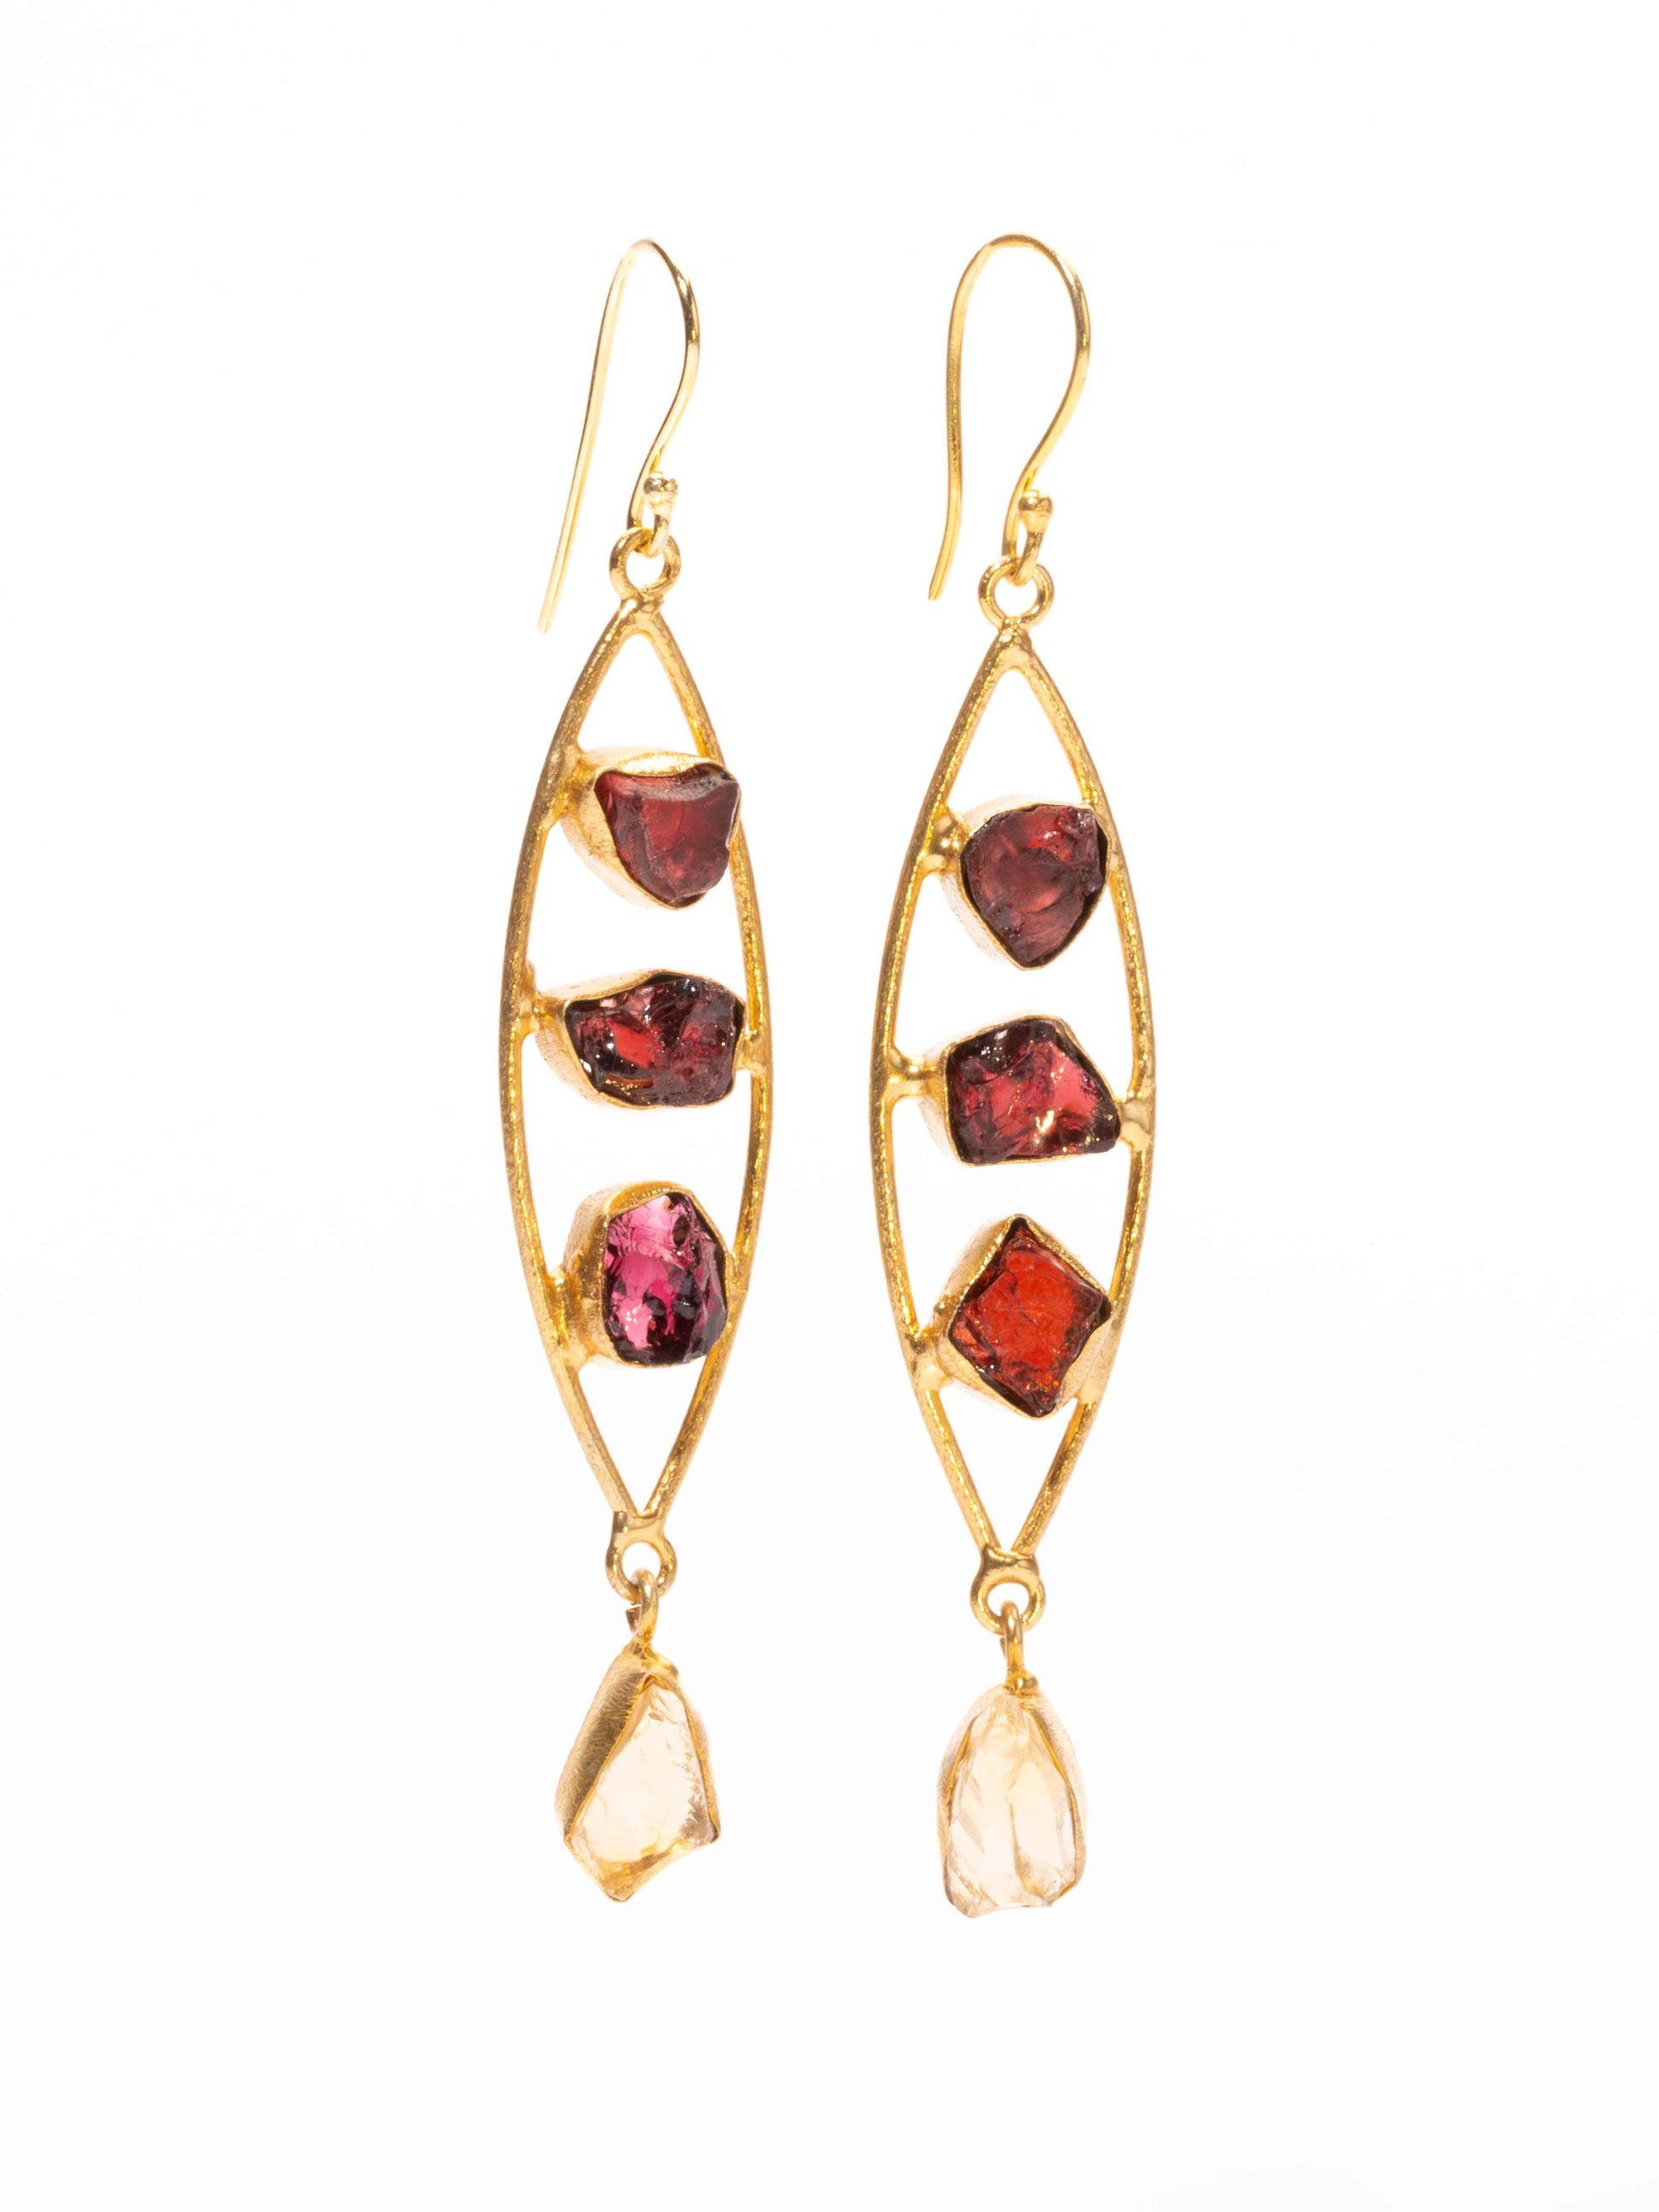 Gold Luxe earrings - fish shaped garnet and citrine